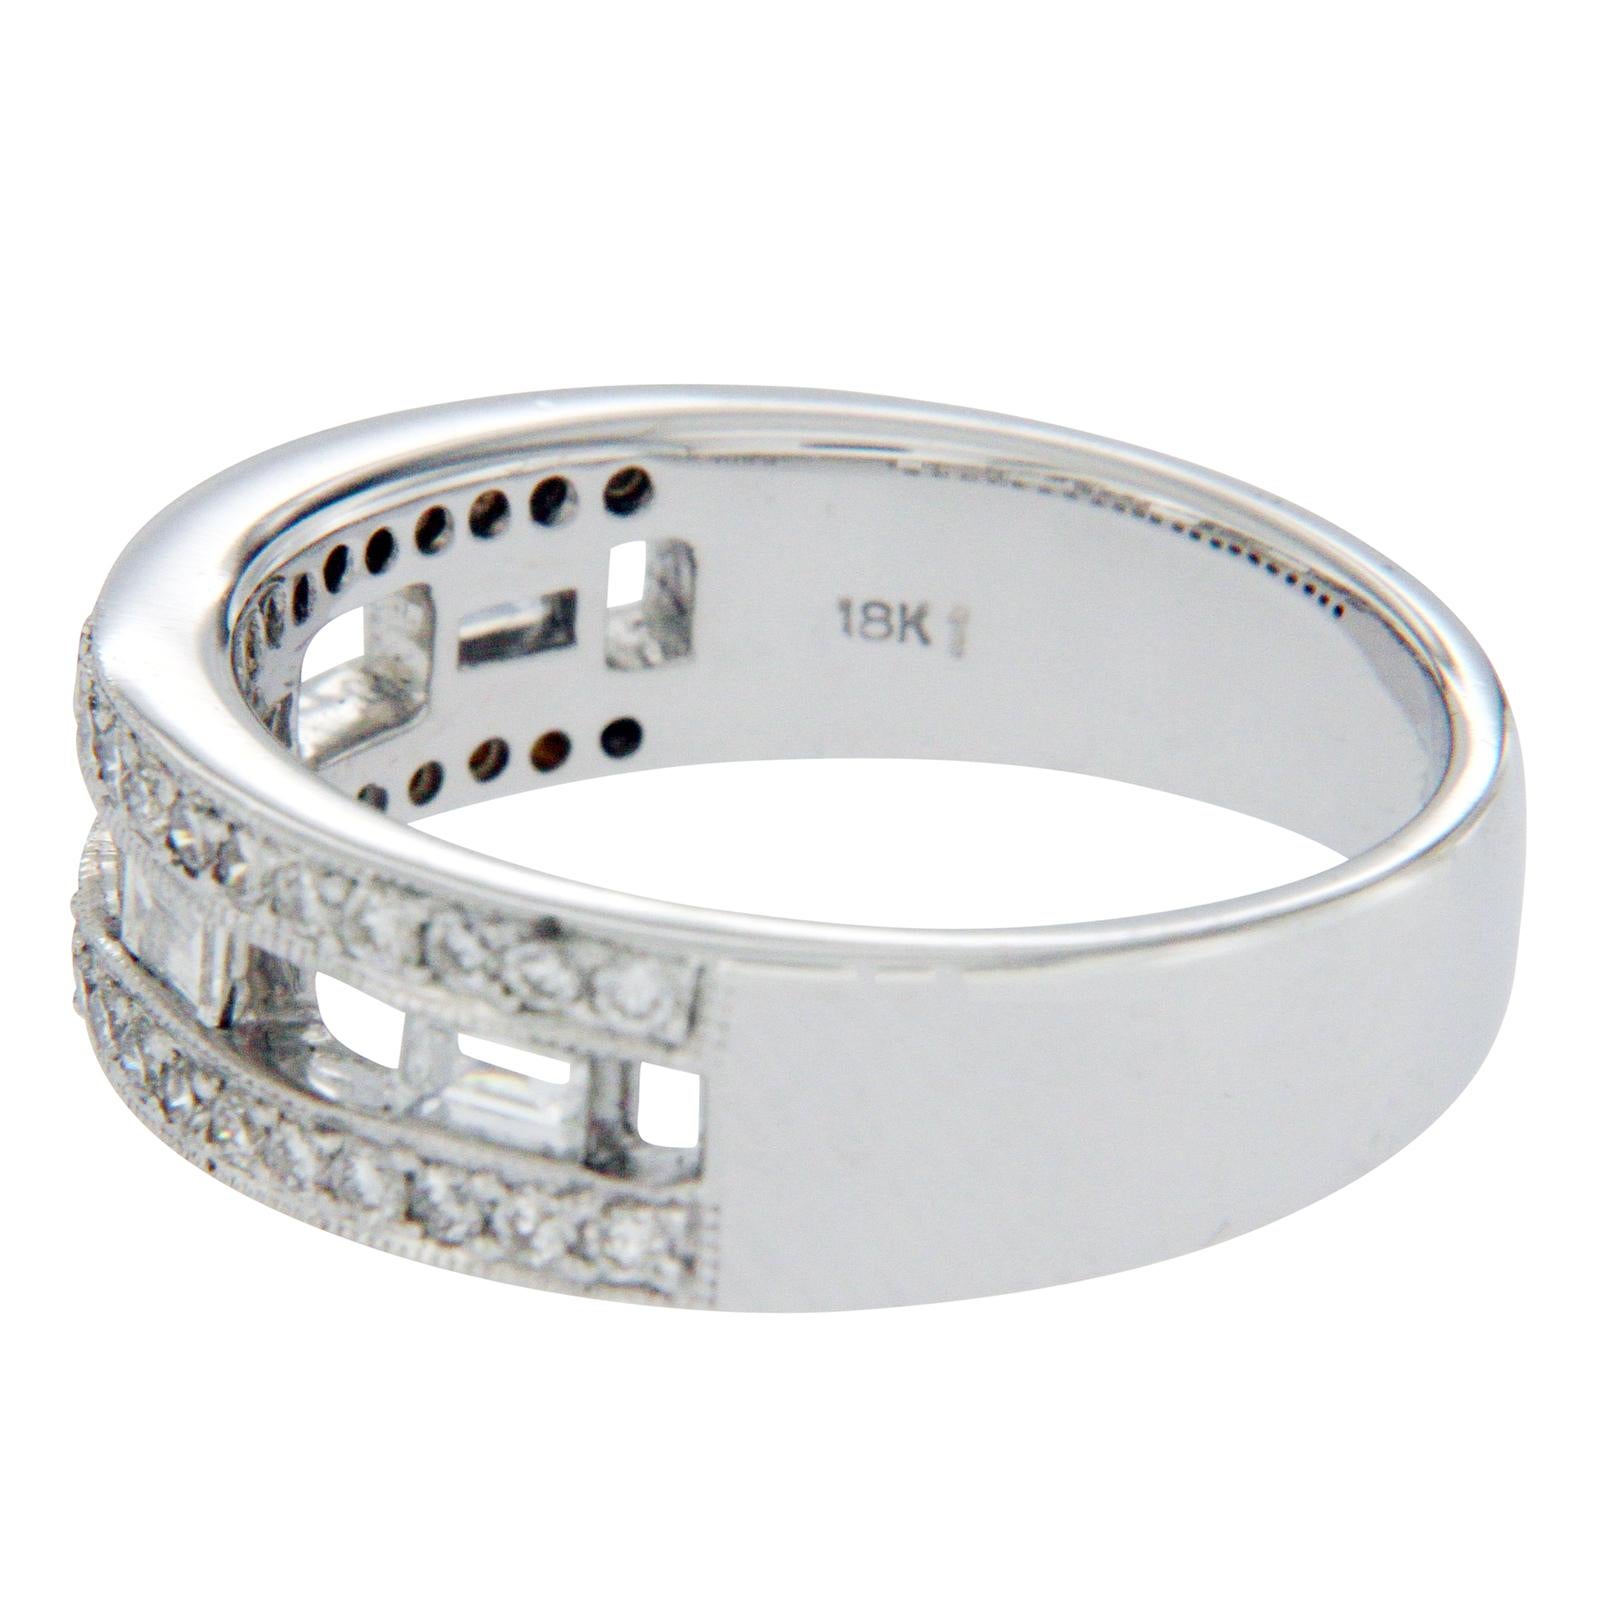 Type: Ring
Top: 6 mm
Band Width: 4.7 mm
Metal: White Gold
Metal Purity: 18K
Hallmarks: 18K
Total Weight: 6.3 Grams
Stone Type: G SI1 0.67 CT Diamonds
Condition: New
Stock Number: NP17

We accept size change on this Ring.